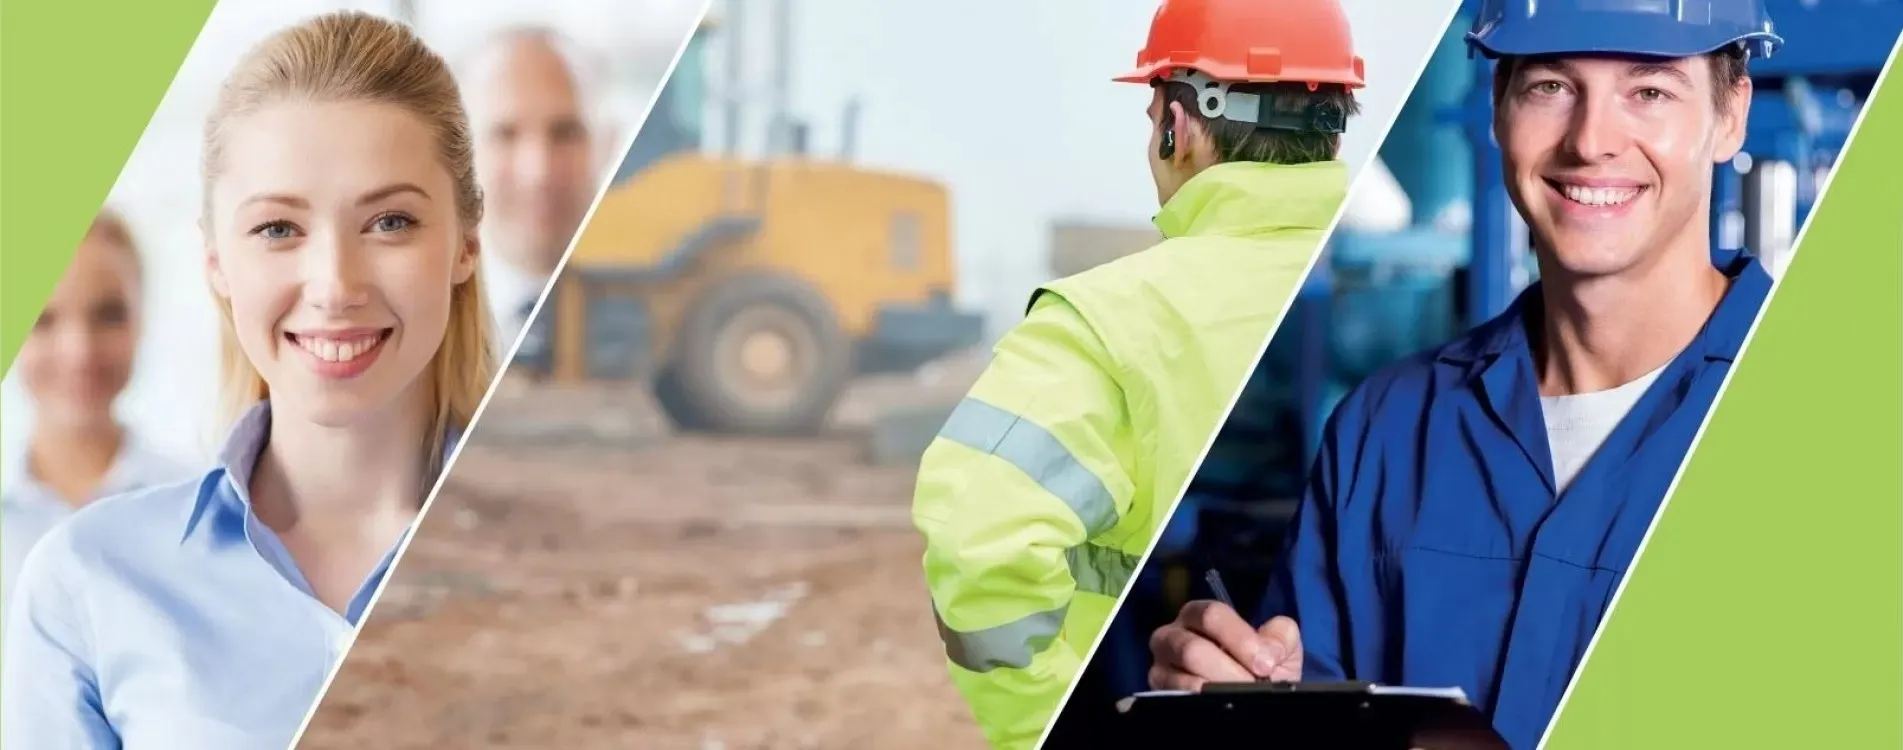 Health & Safety Consultancy Services in Walthamstow